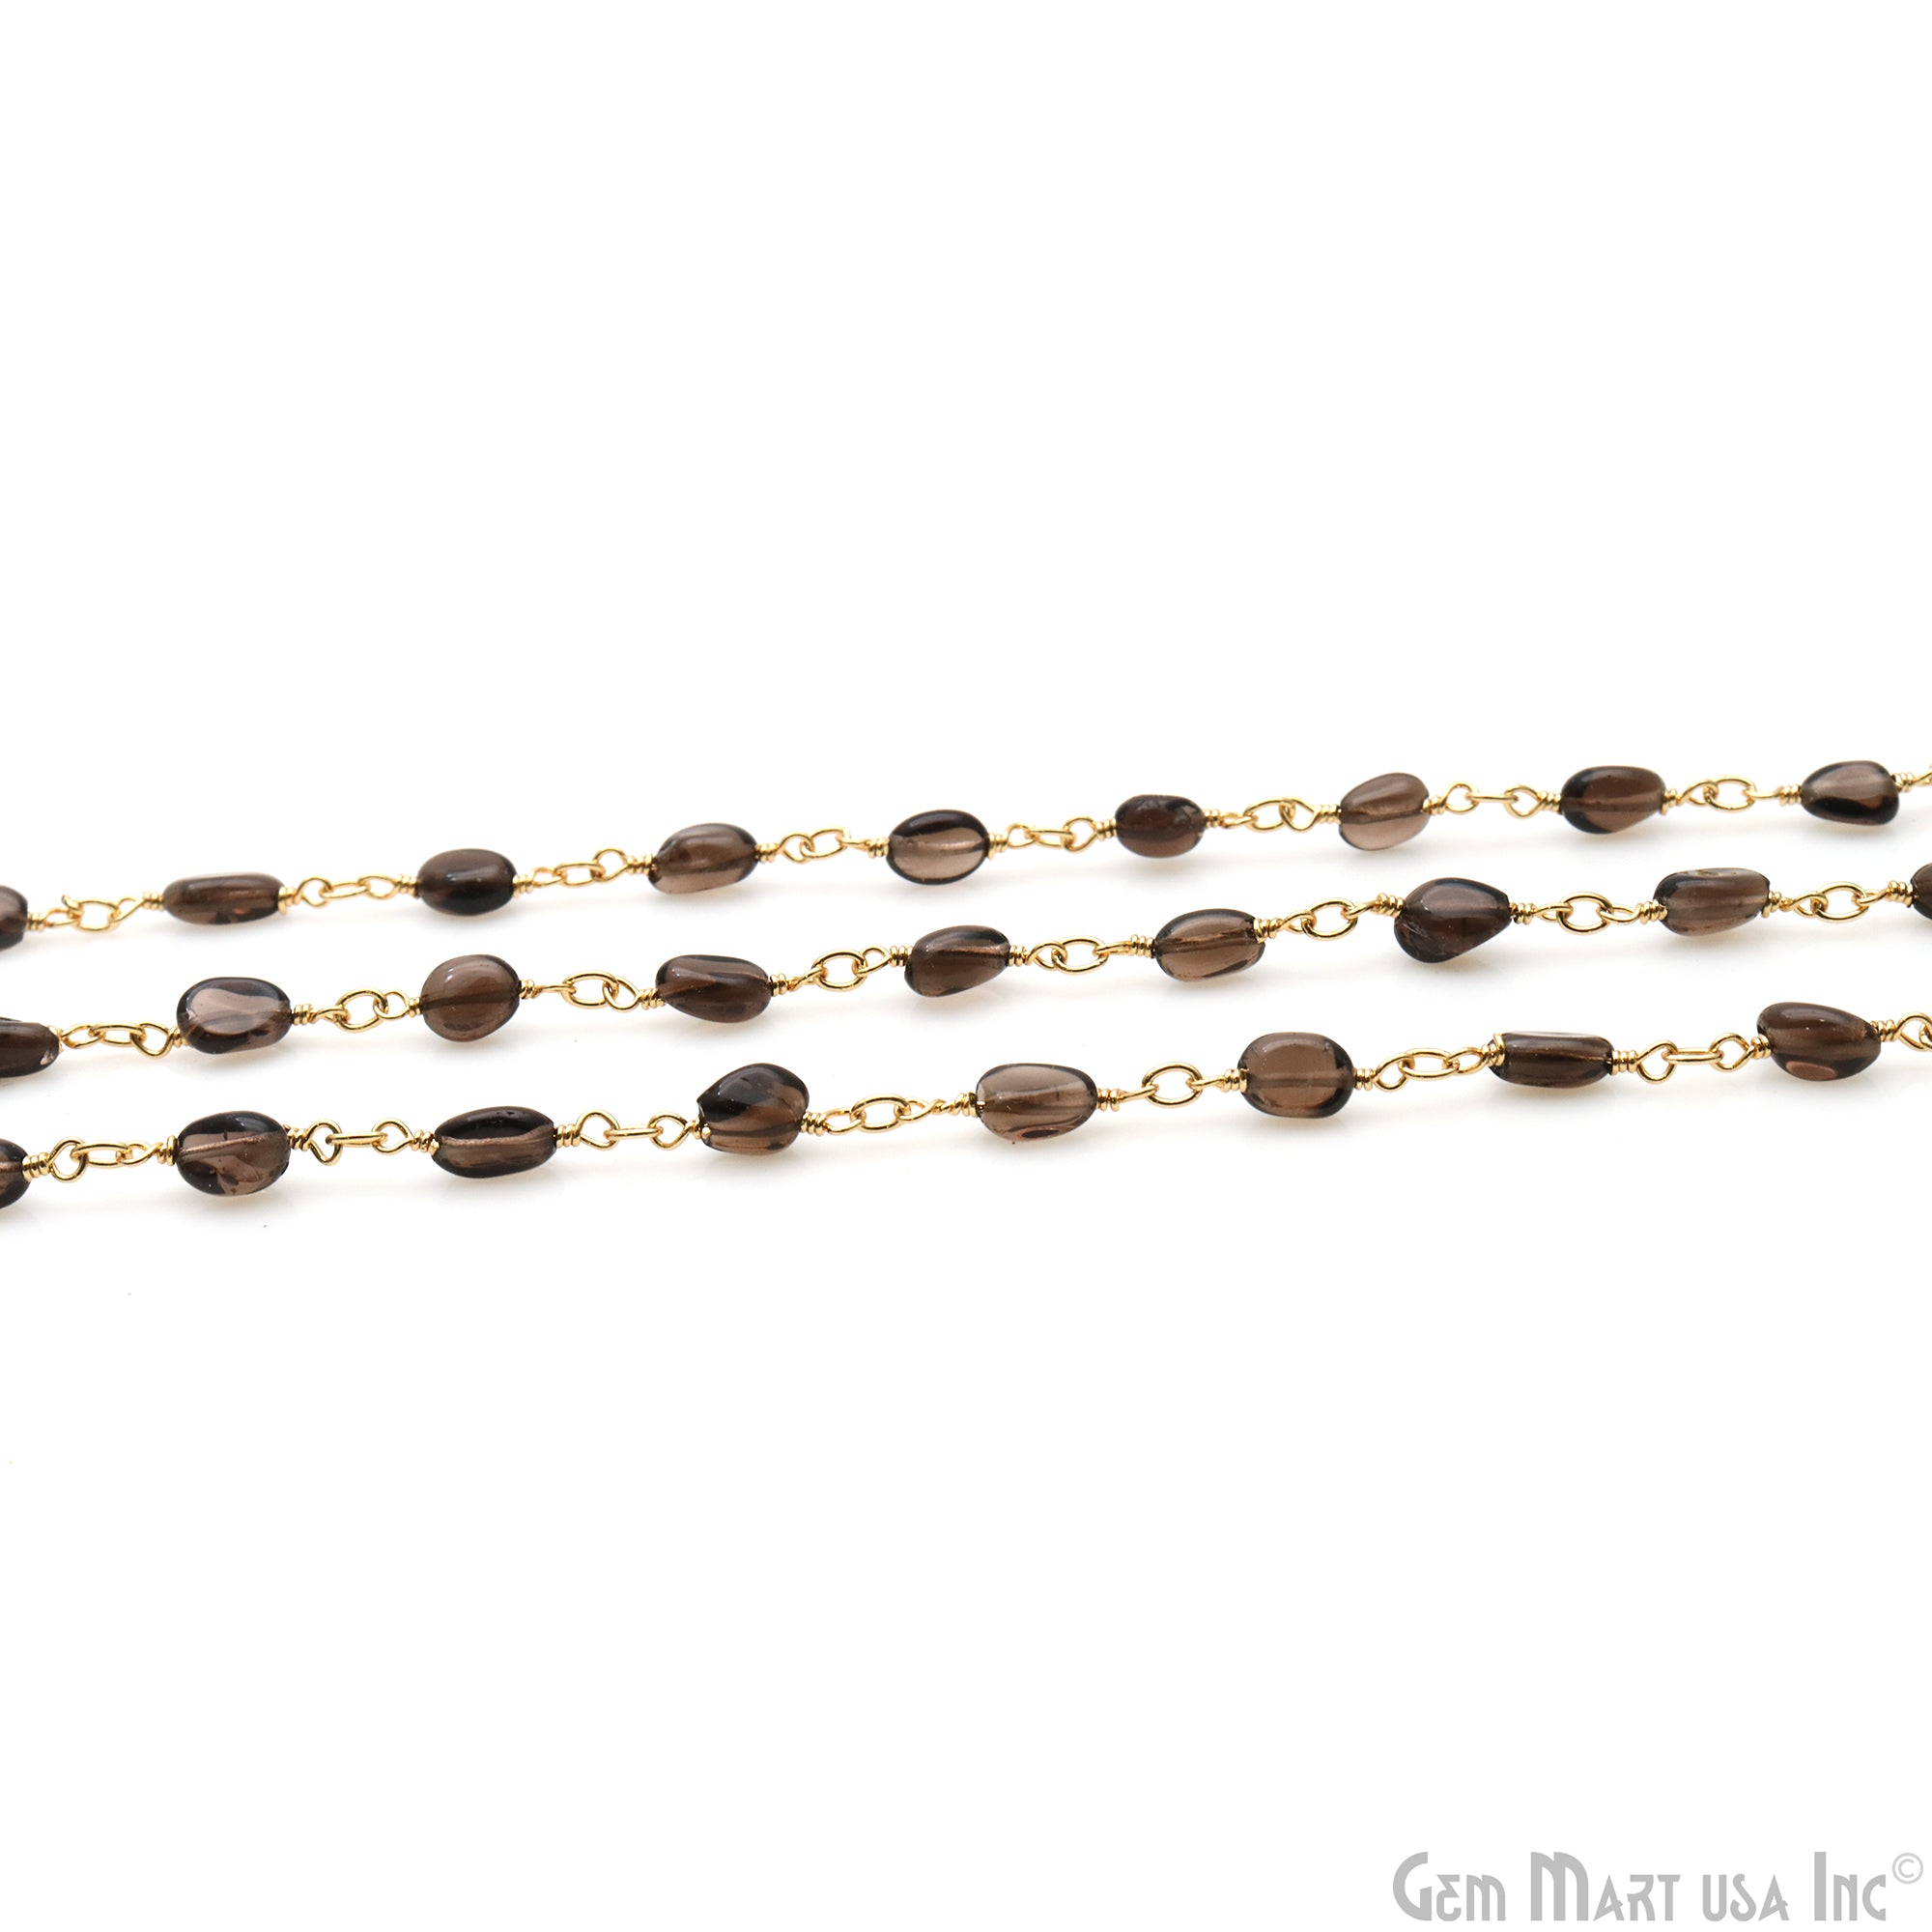 Smoky Topaz Tumble Beads 8x5mm Gold Wire Wrapped Rosary Chain